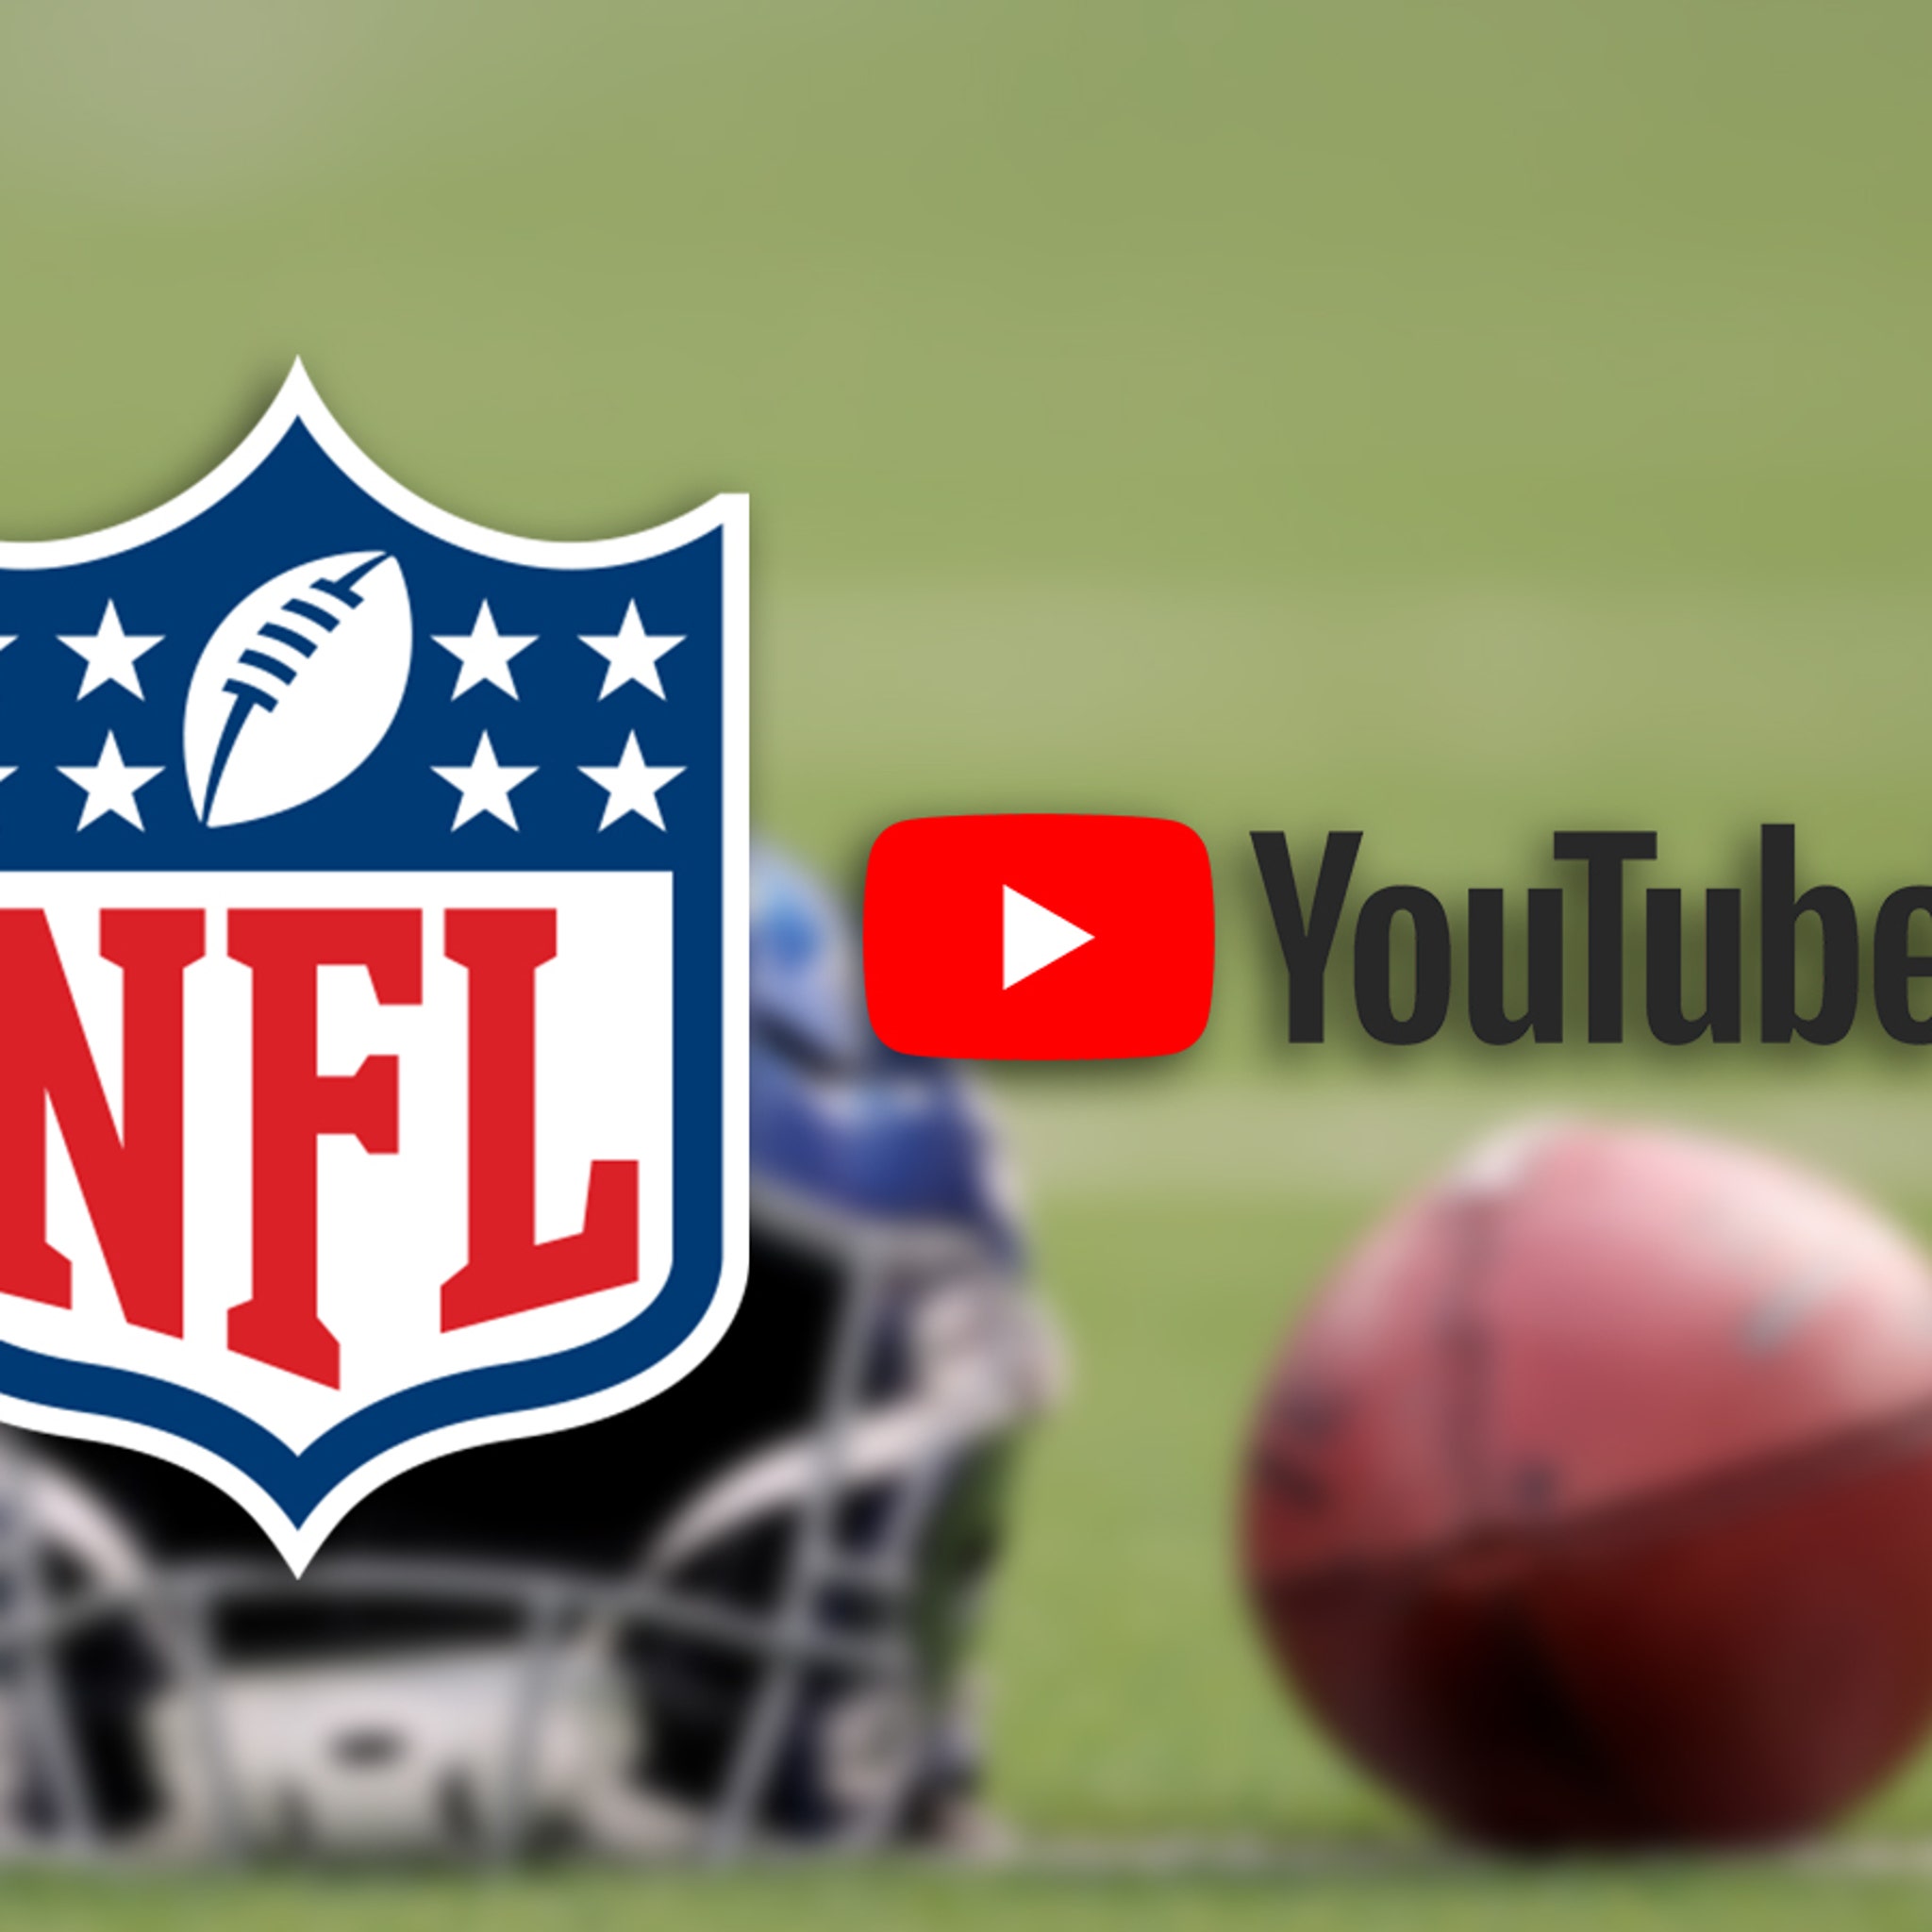 nfl sunday ticket packages